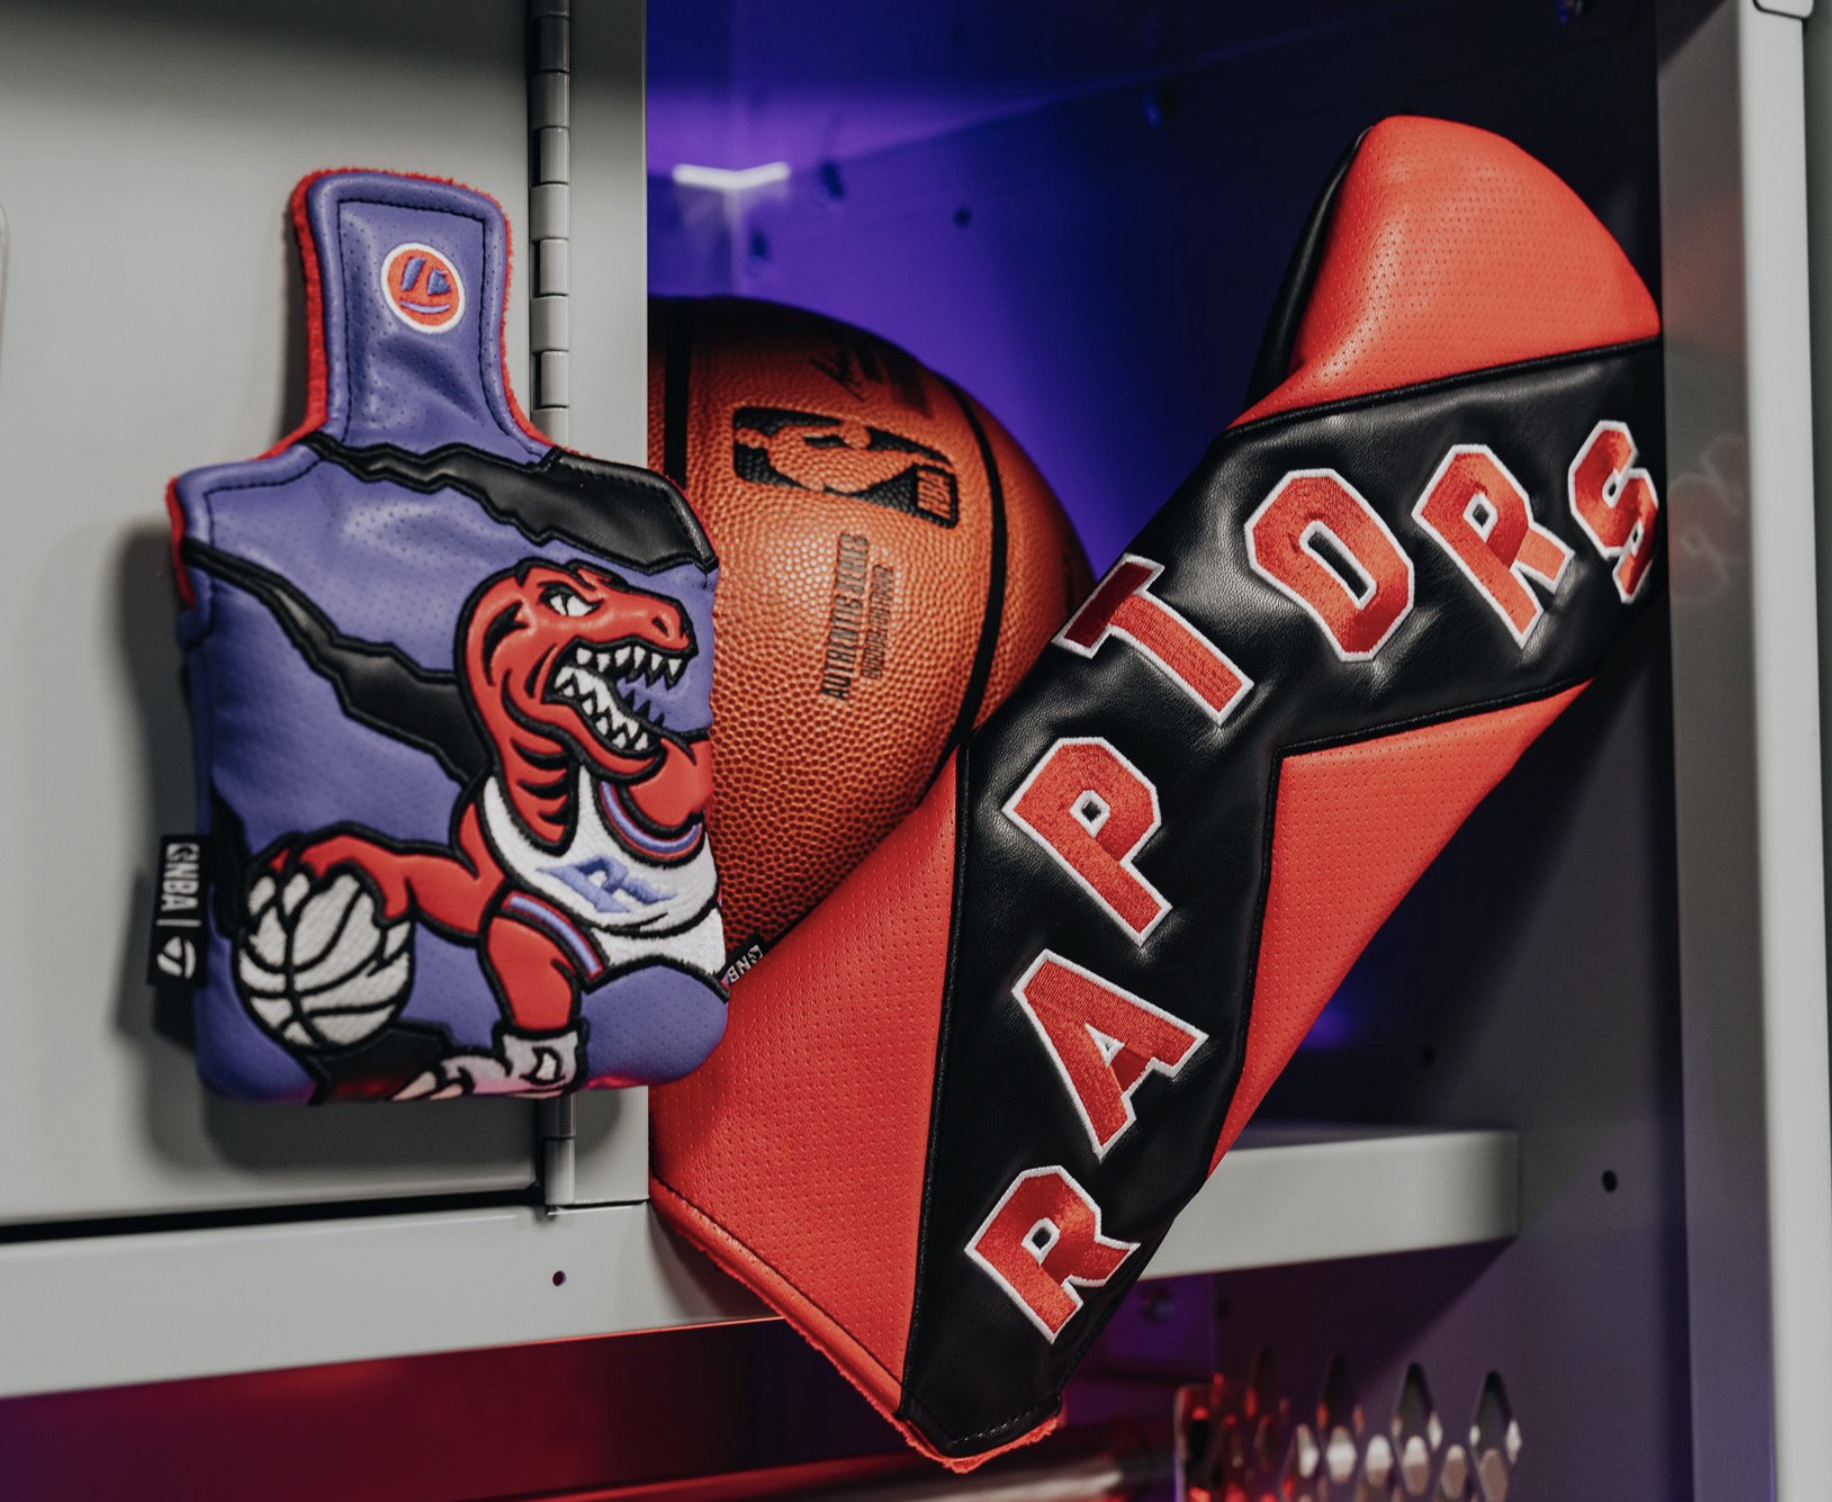 TaylorMade Golf Launches NBA Jersey Inspired Driver and Putter Headcovers  For All 30 Teams